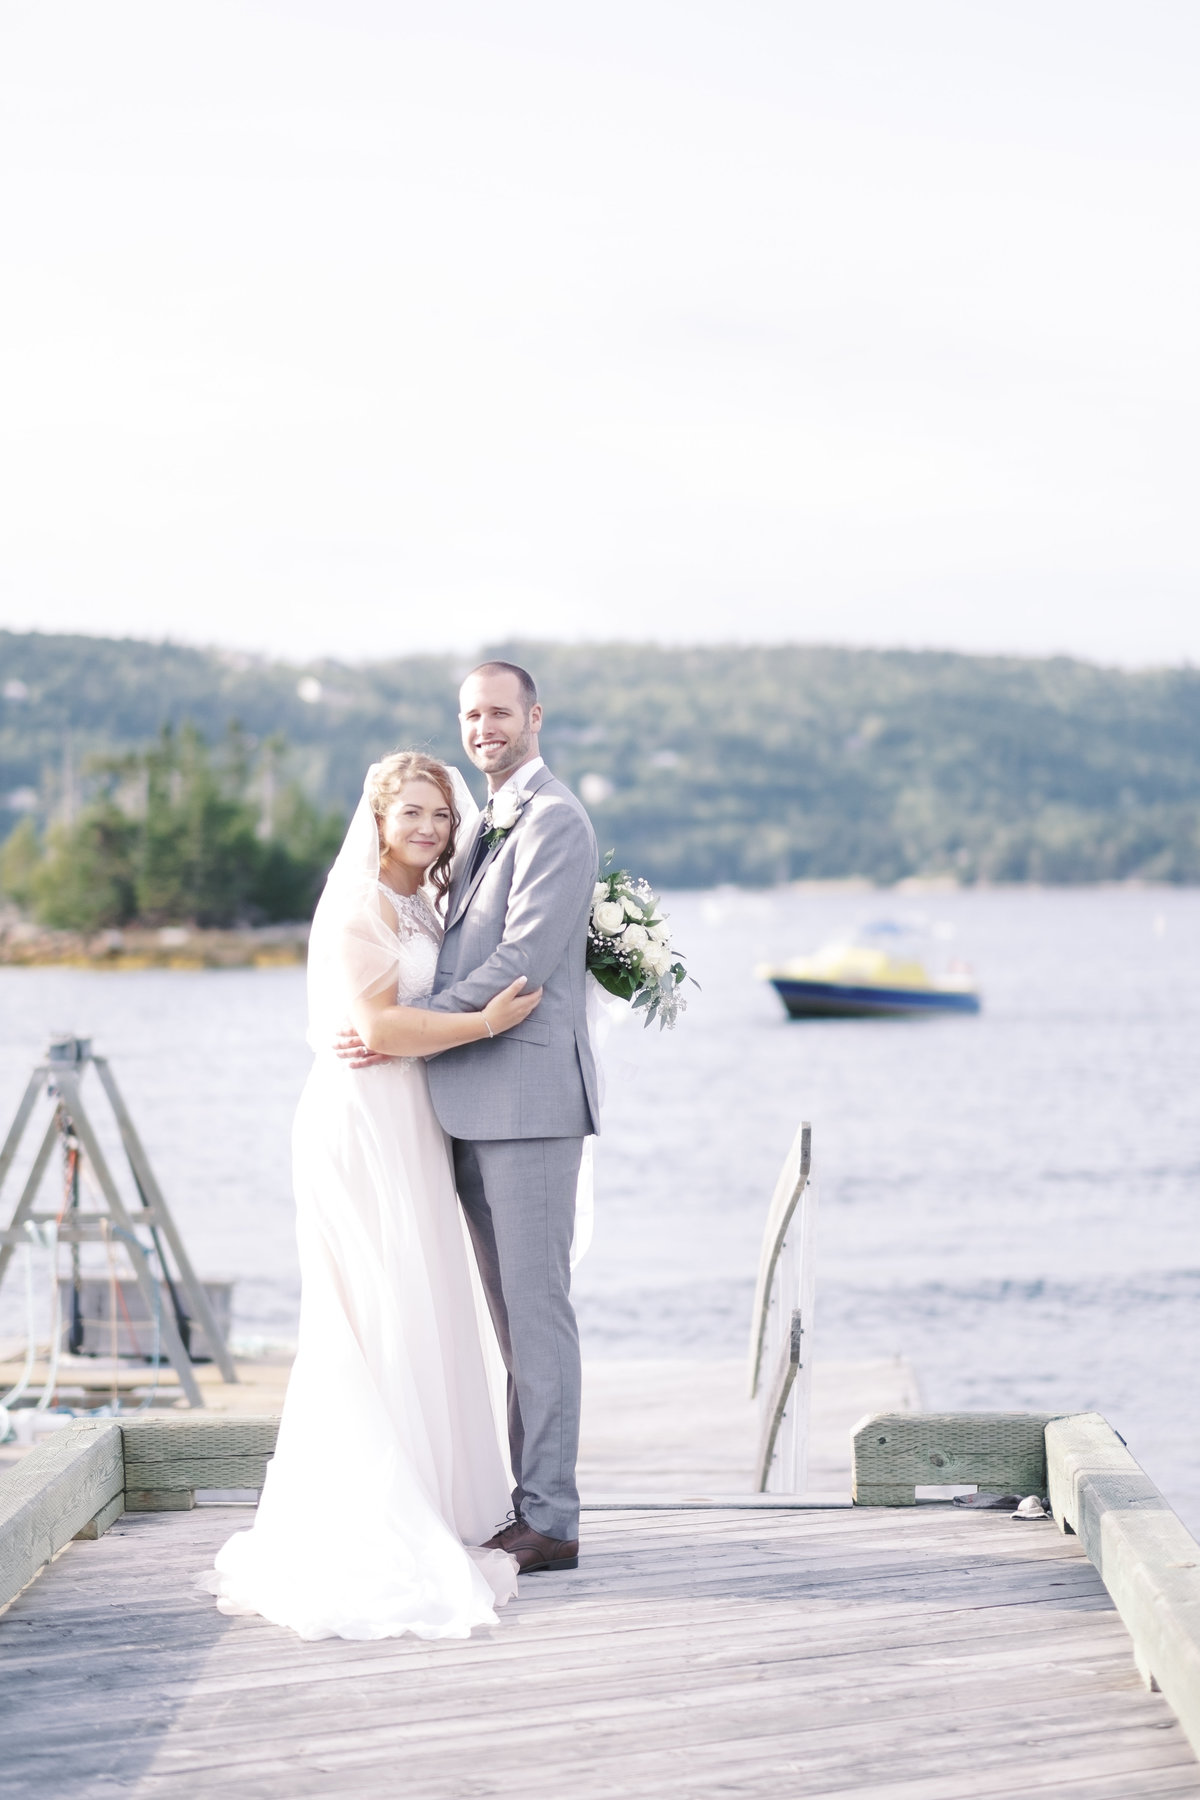 Jacqueline Anne Photography - A+A - Shining Waters Wedding-648